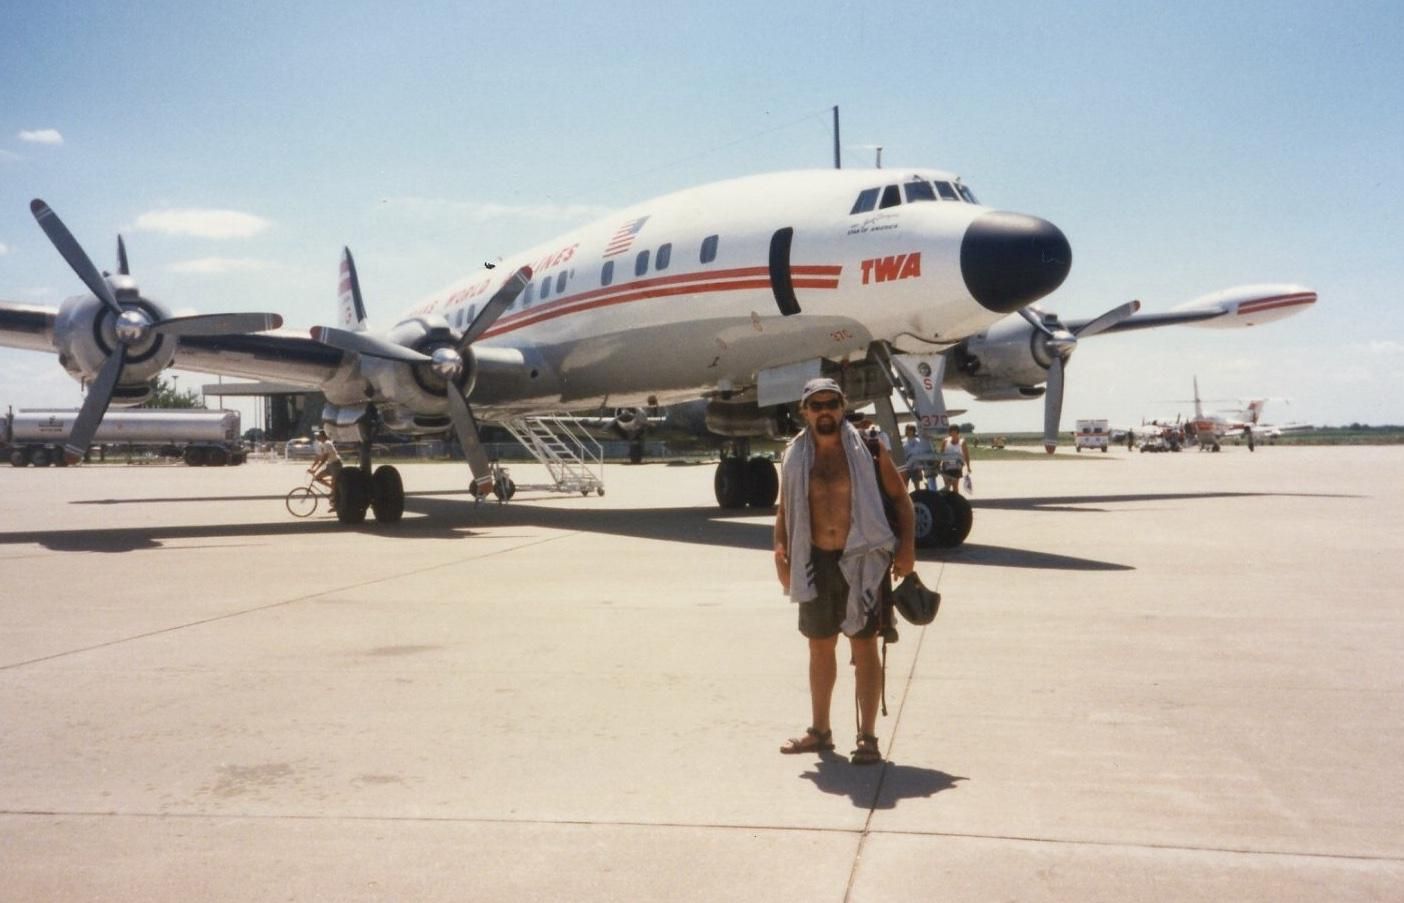 — — - Back in my skydiving days 1995. I had the opportunity to skydive out of this beauty at a skydiving convention in Quincy Illinoise. 